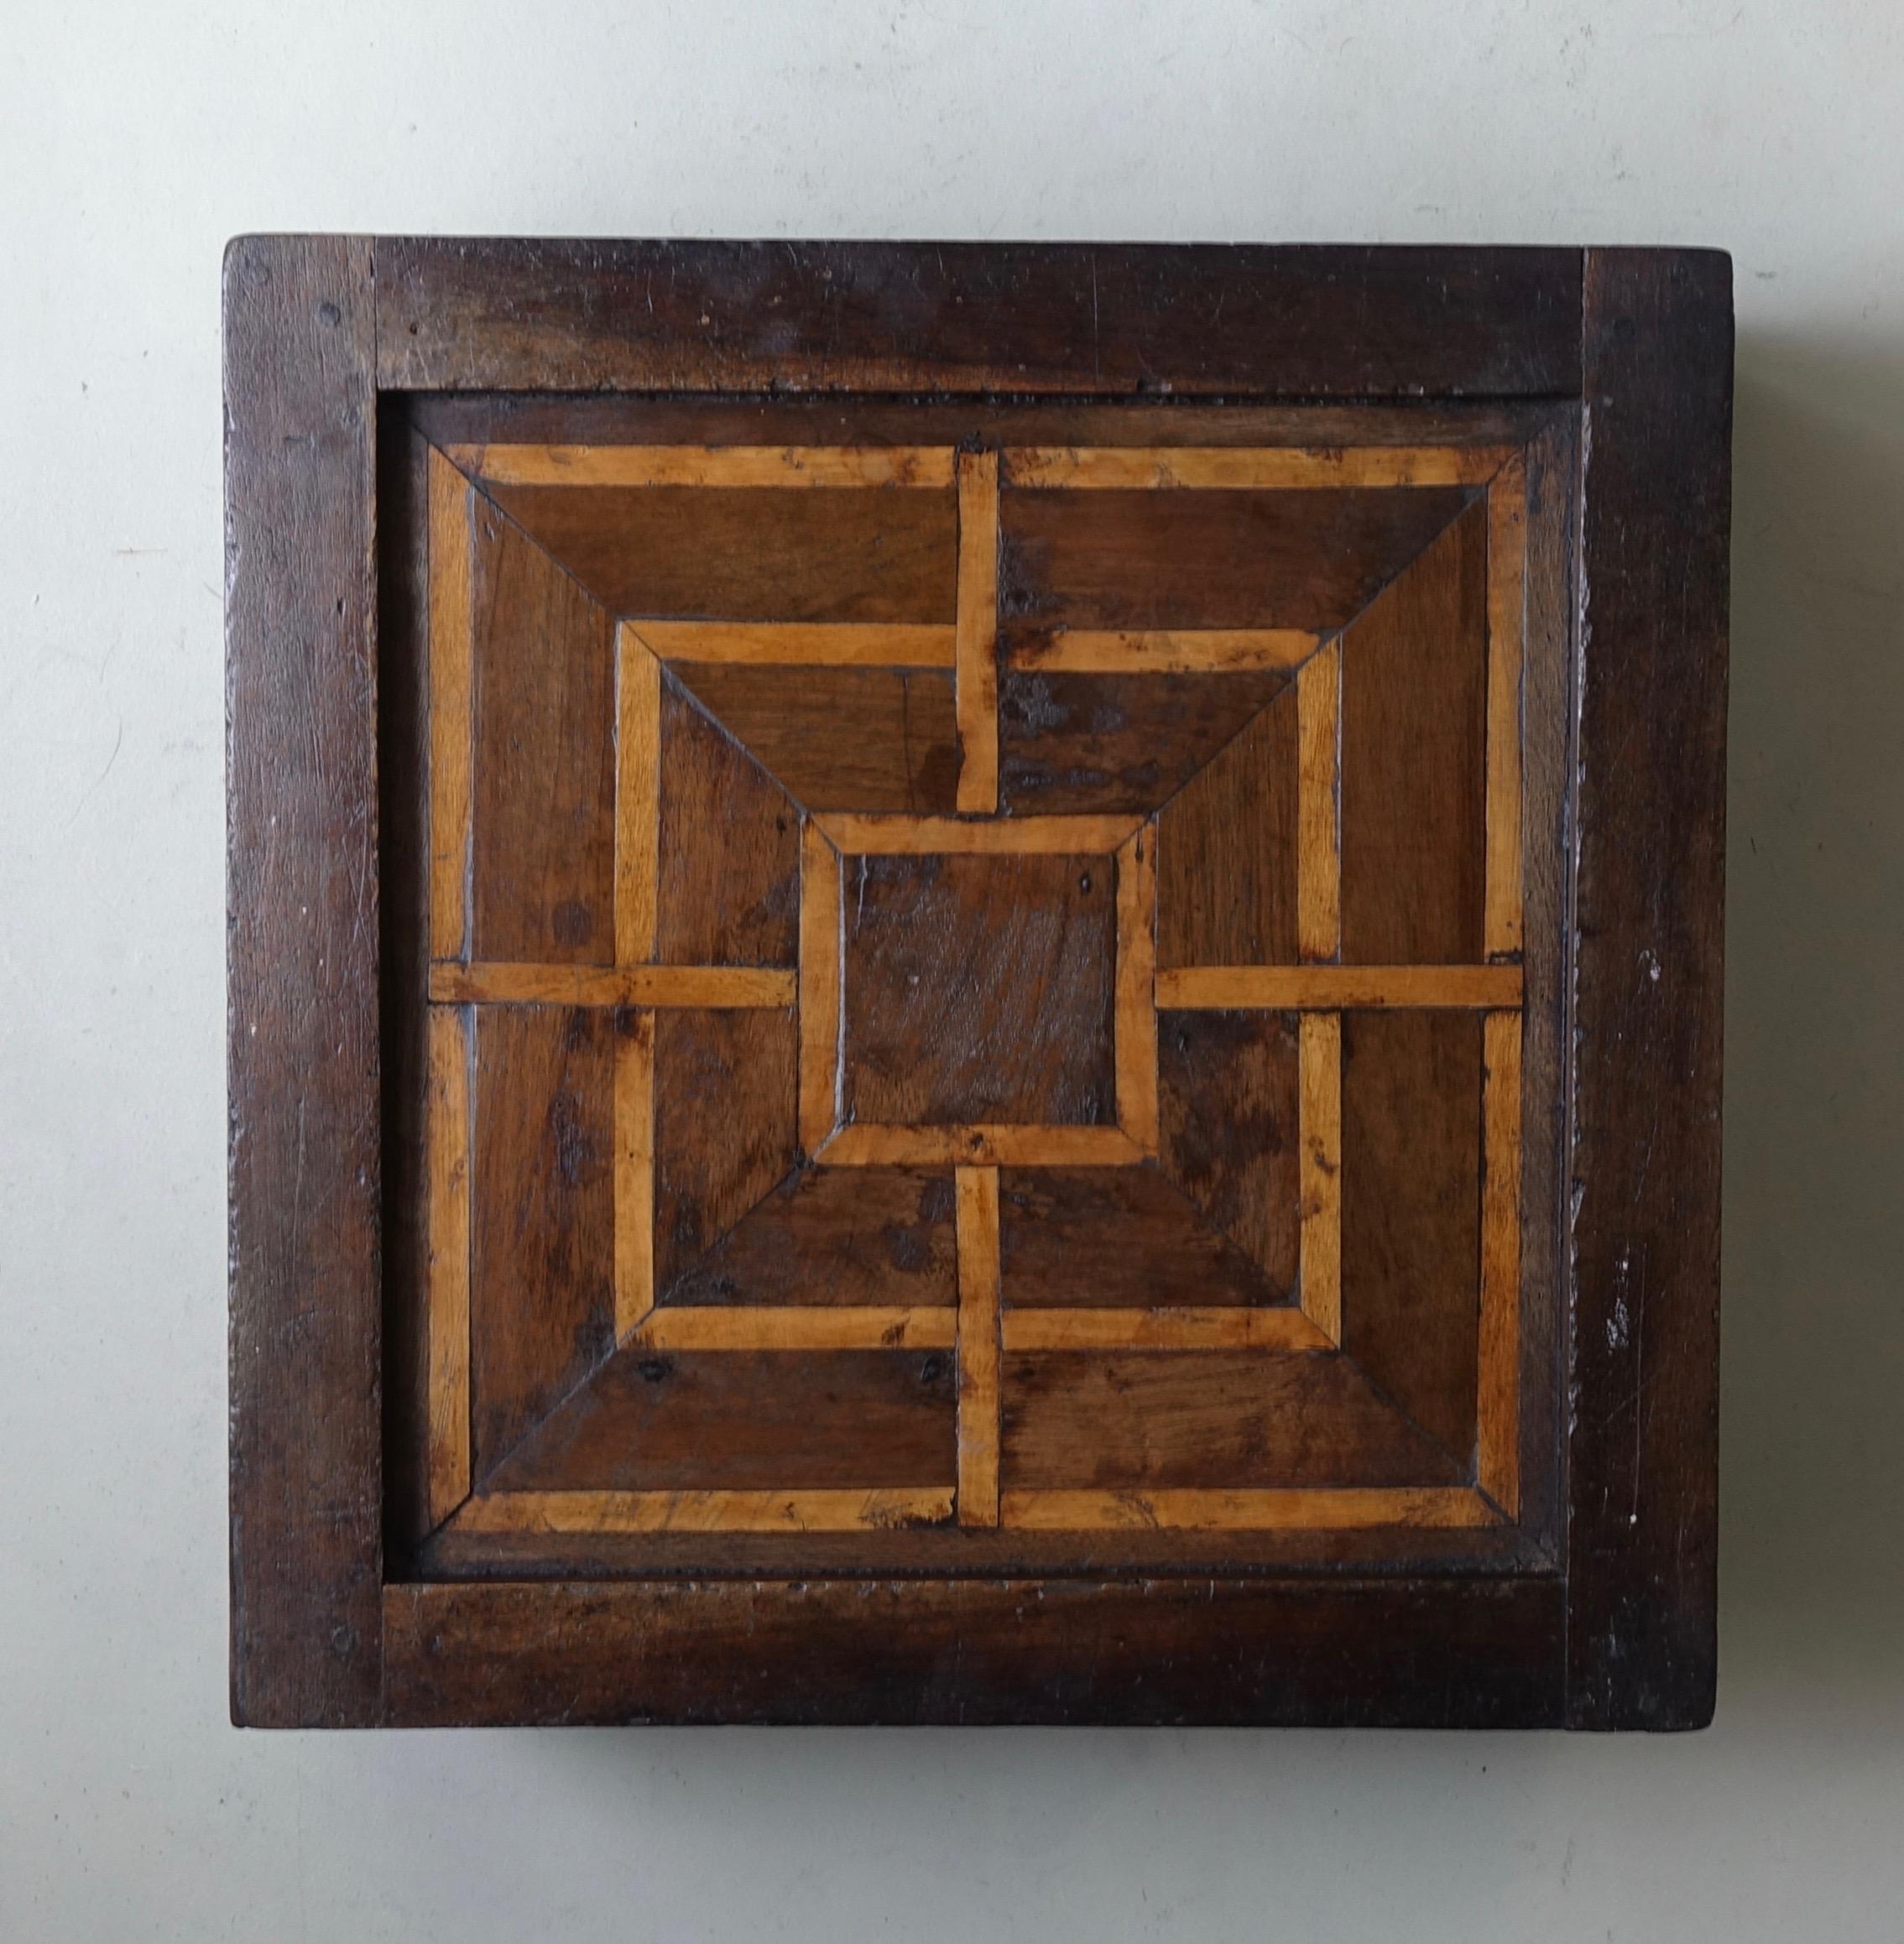 Wood and leather game box for chess, Nine men’s morris and Backgammon
Italy, 19th century
33 x 33,3 x 11,2 cm

Nine men’s morris also known as mill game (merelles, from the Latin world merellus which means « gamepiece ») is a strategy board game for